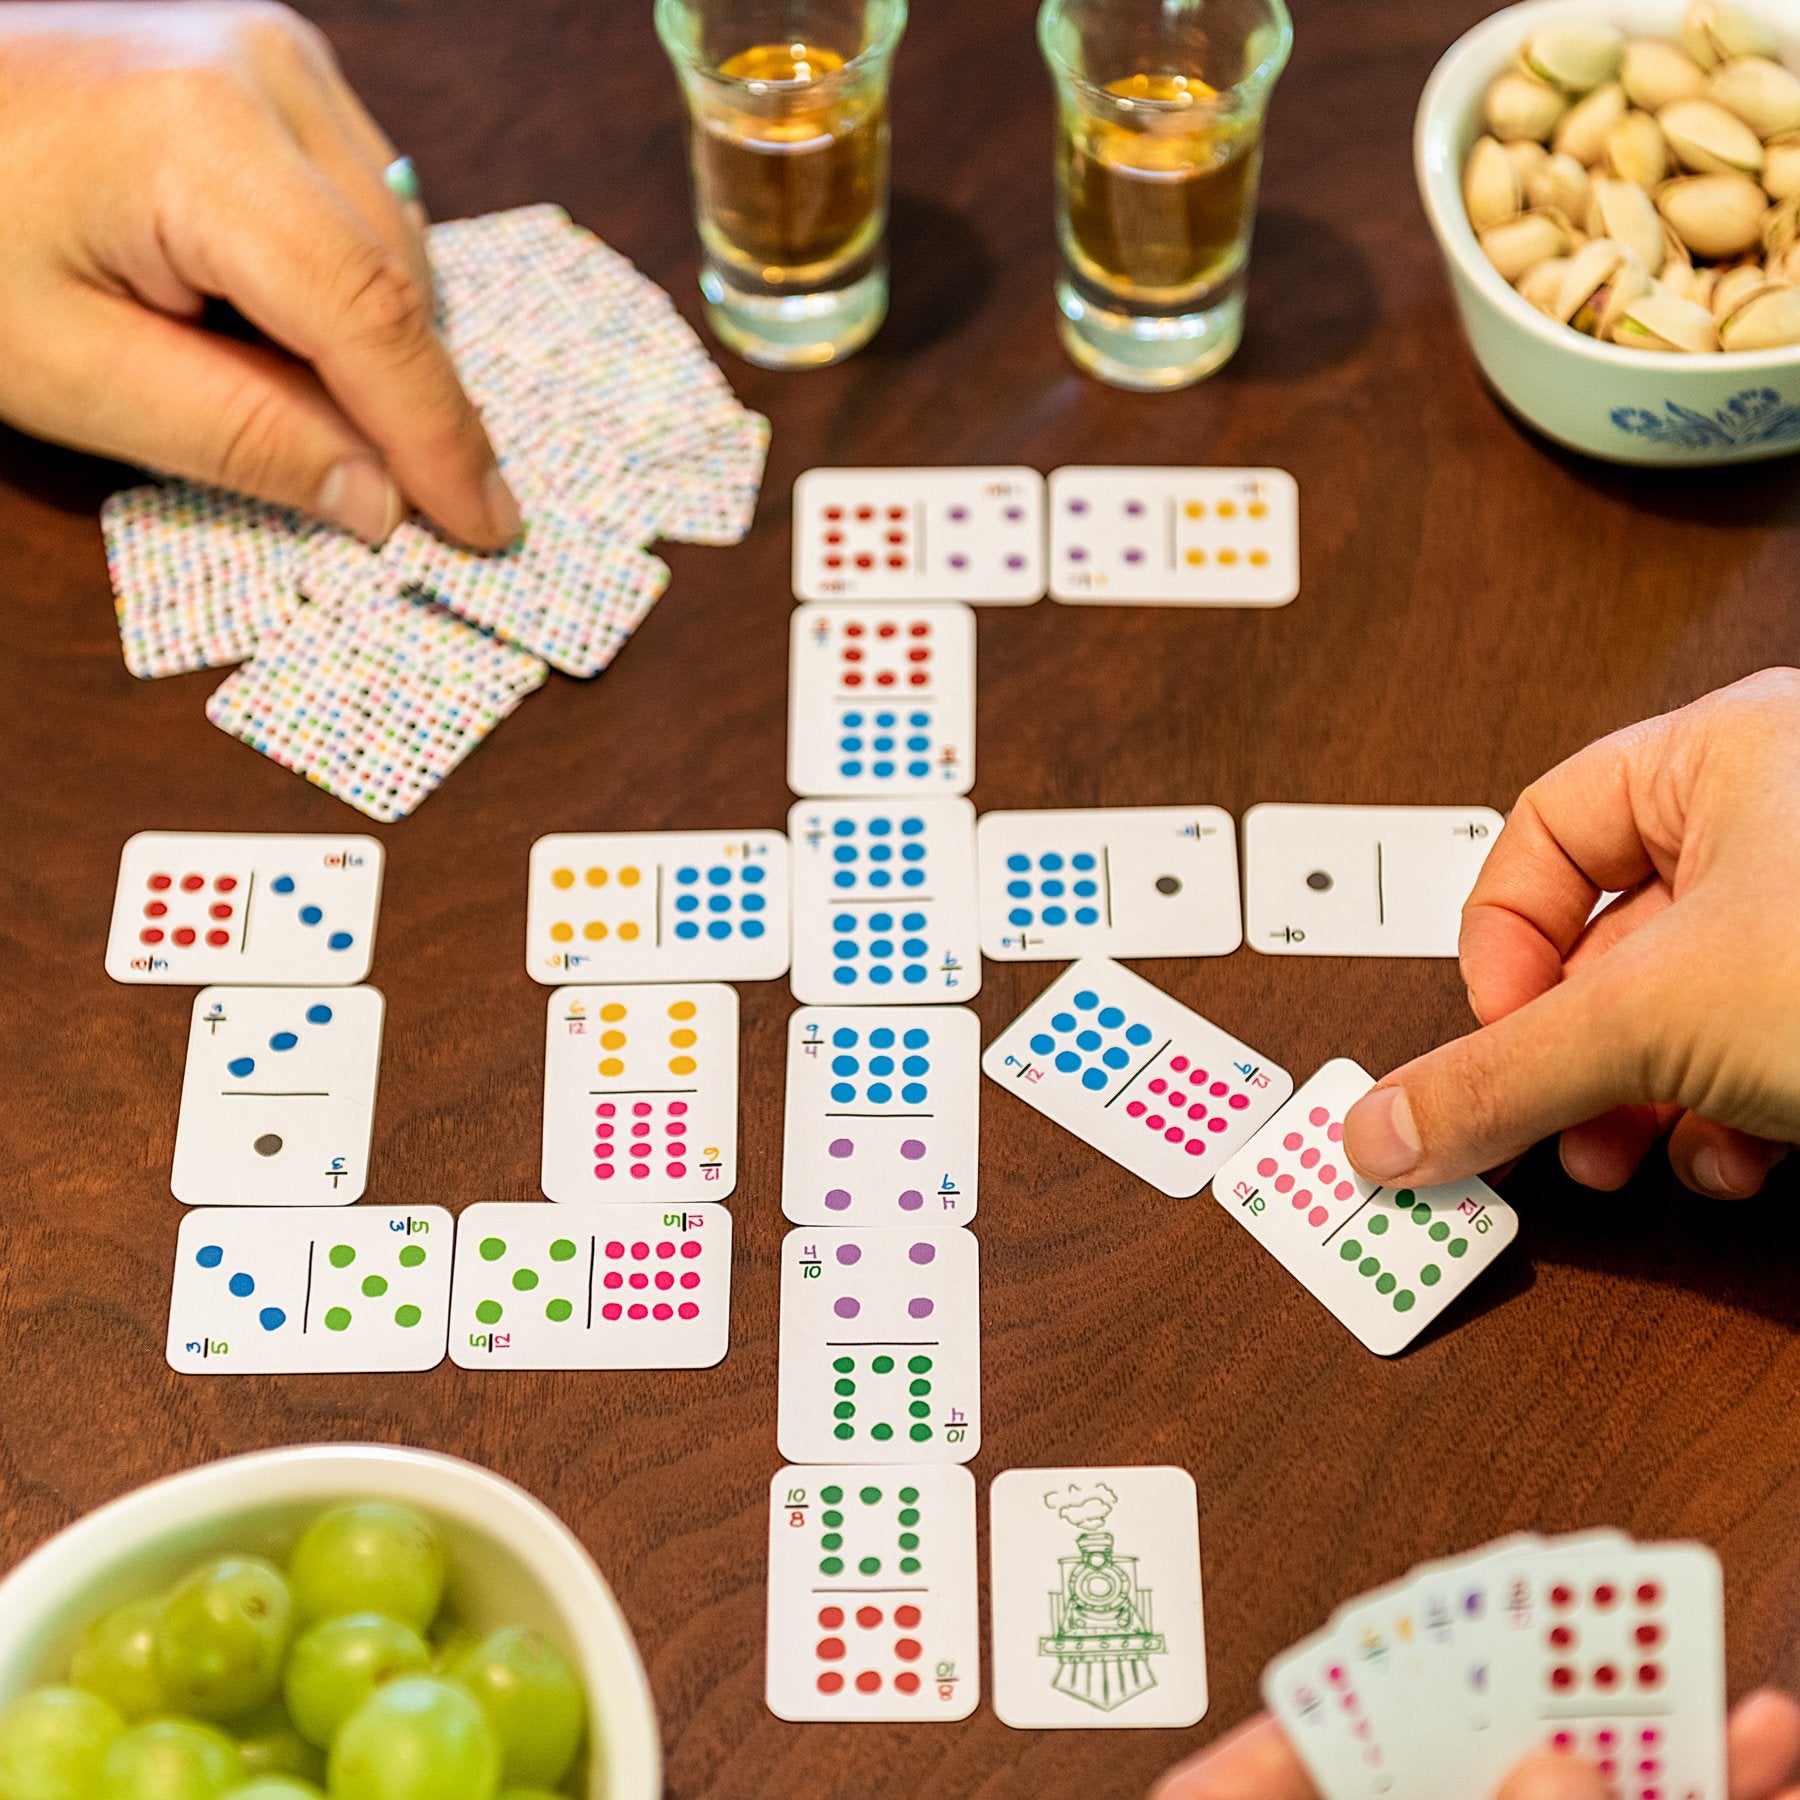 Two people playing dominoes using small, domino-sized playing cards on a walnut wood table with snacks and drinks. The domino cards are double 12 with different colors for each number and hand-drawn.